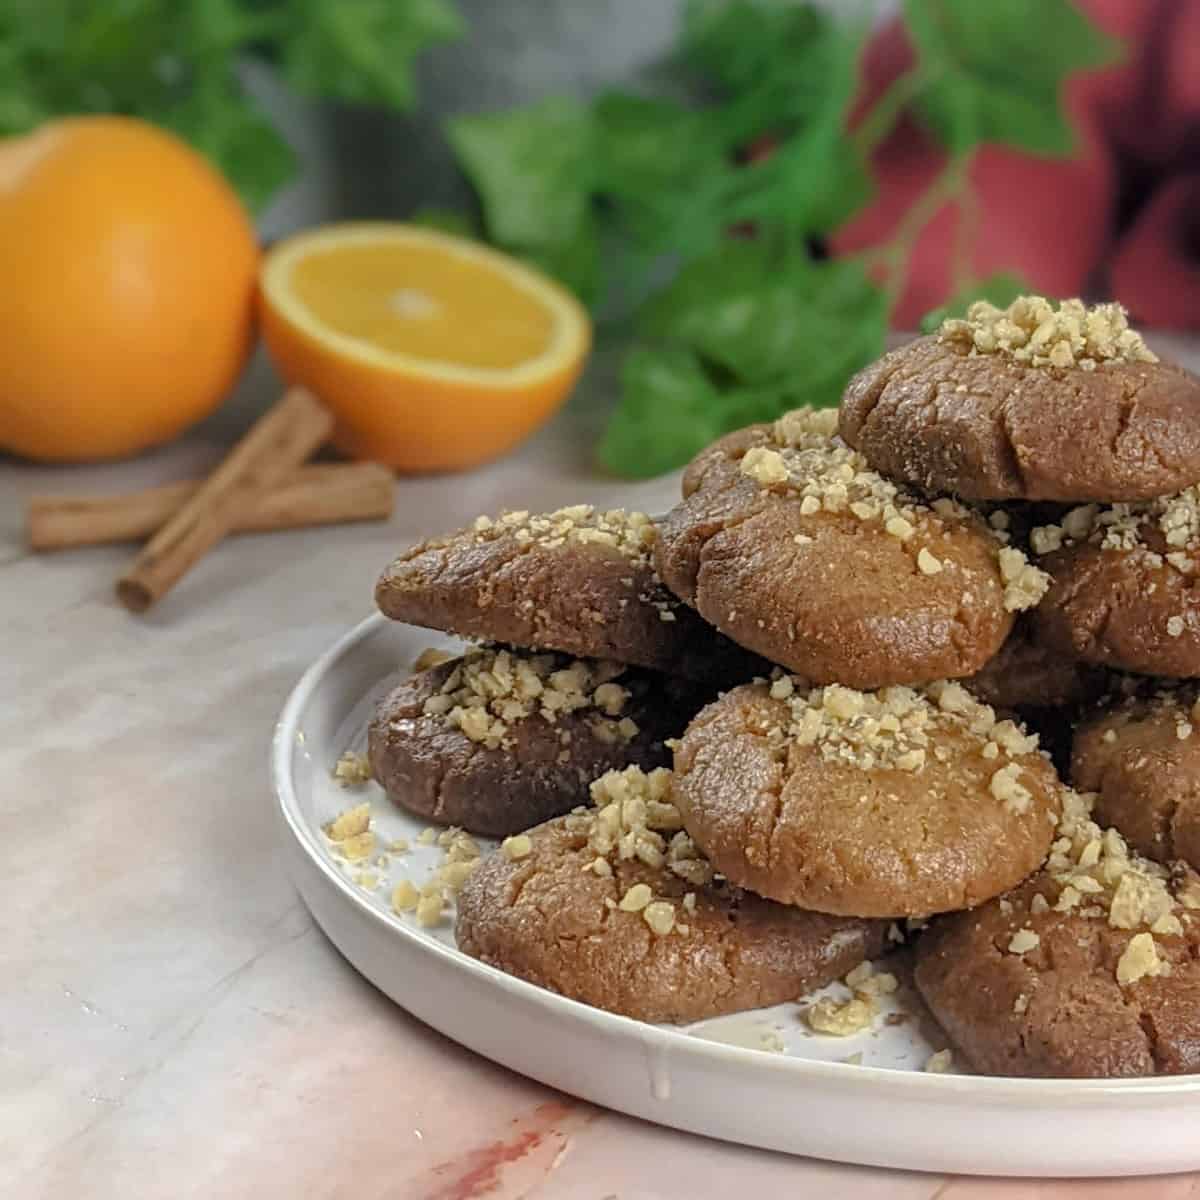 Melomakarona Greek honey cookies served on a white plate with an orange, walnuts and cinnamon sticks on the background.